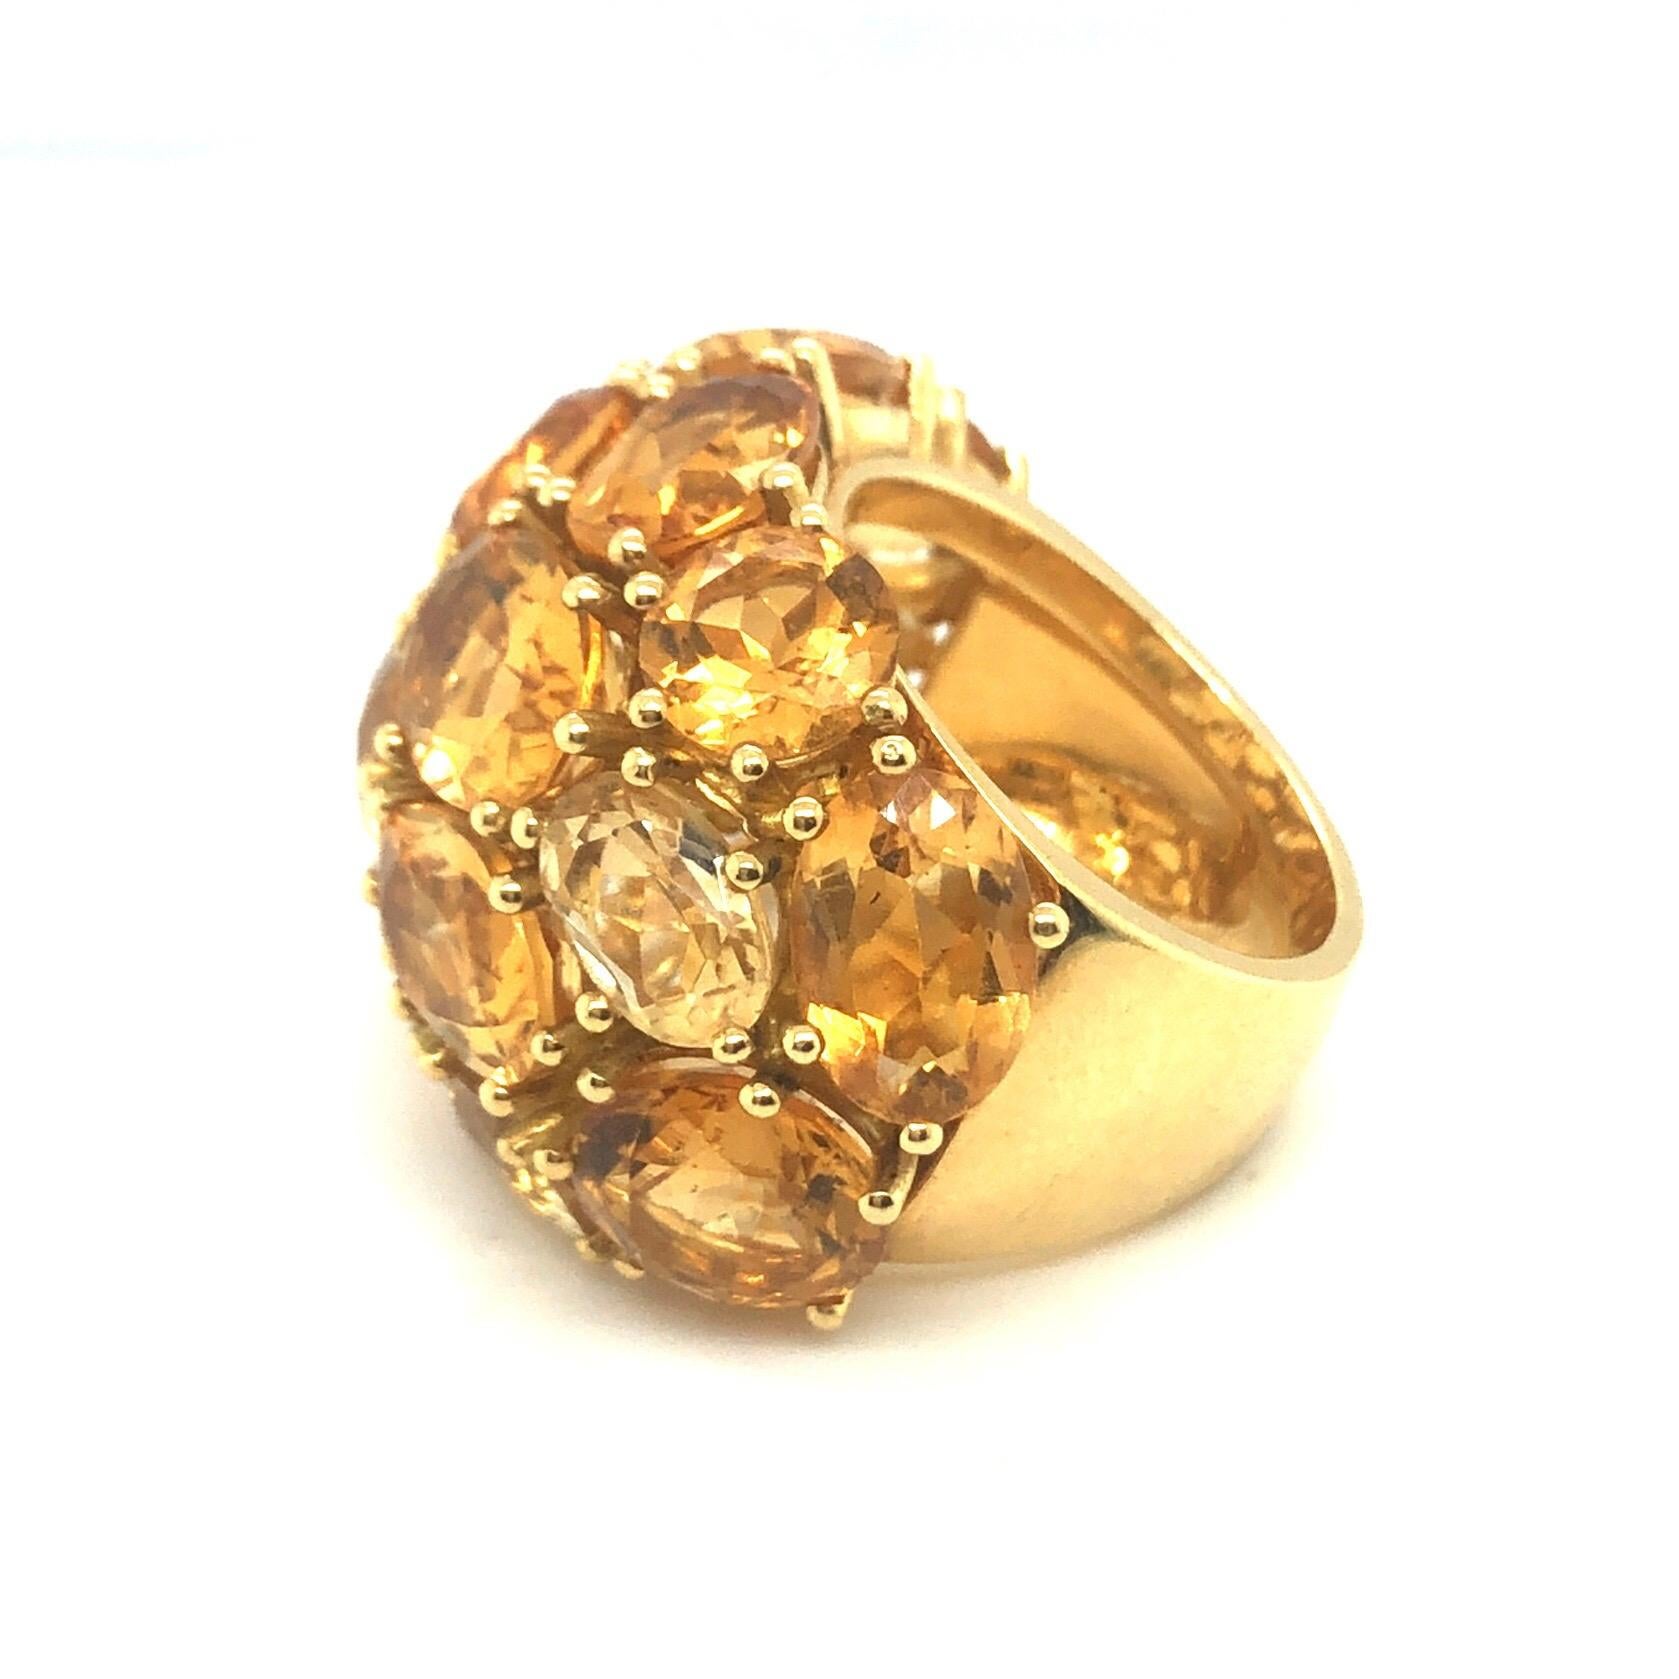 Splendid 18 karat yellow gold and citrine cocktail ring, circa 2000.
Crafted in 18 karat yellow gold, the dome set with 16 round and oval citrines of slightly different yellow shades totalling circa 25 carats, this statement ring is just perfect for